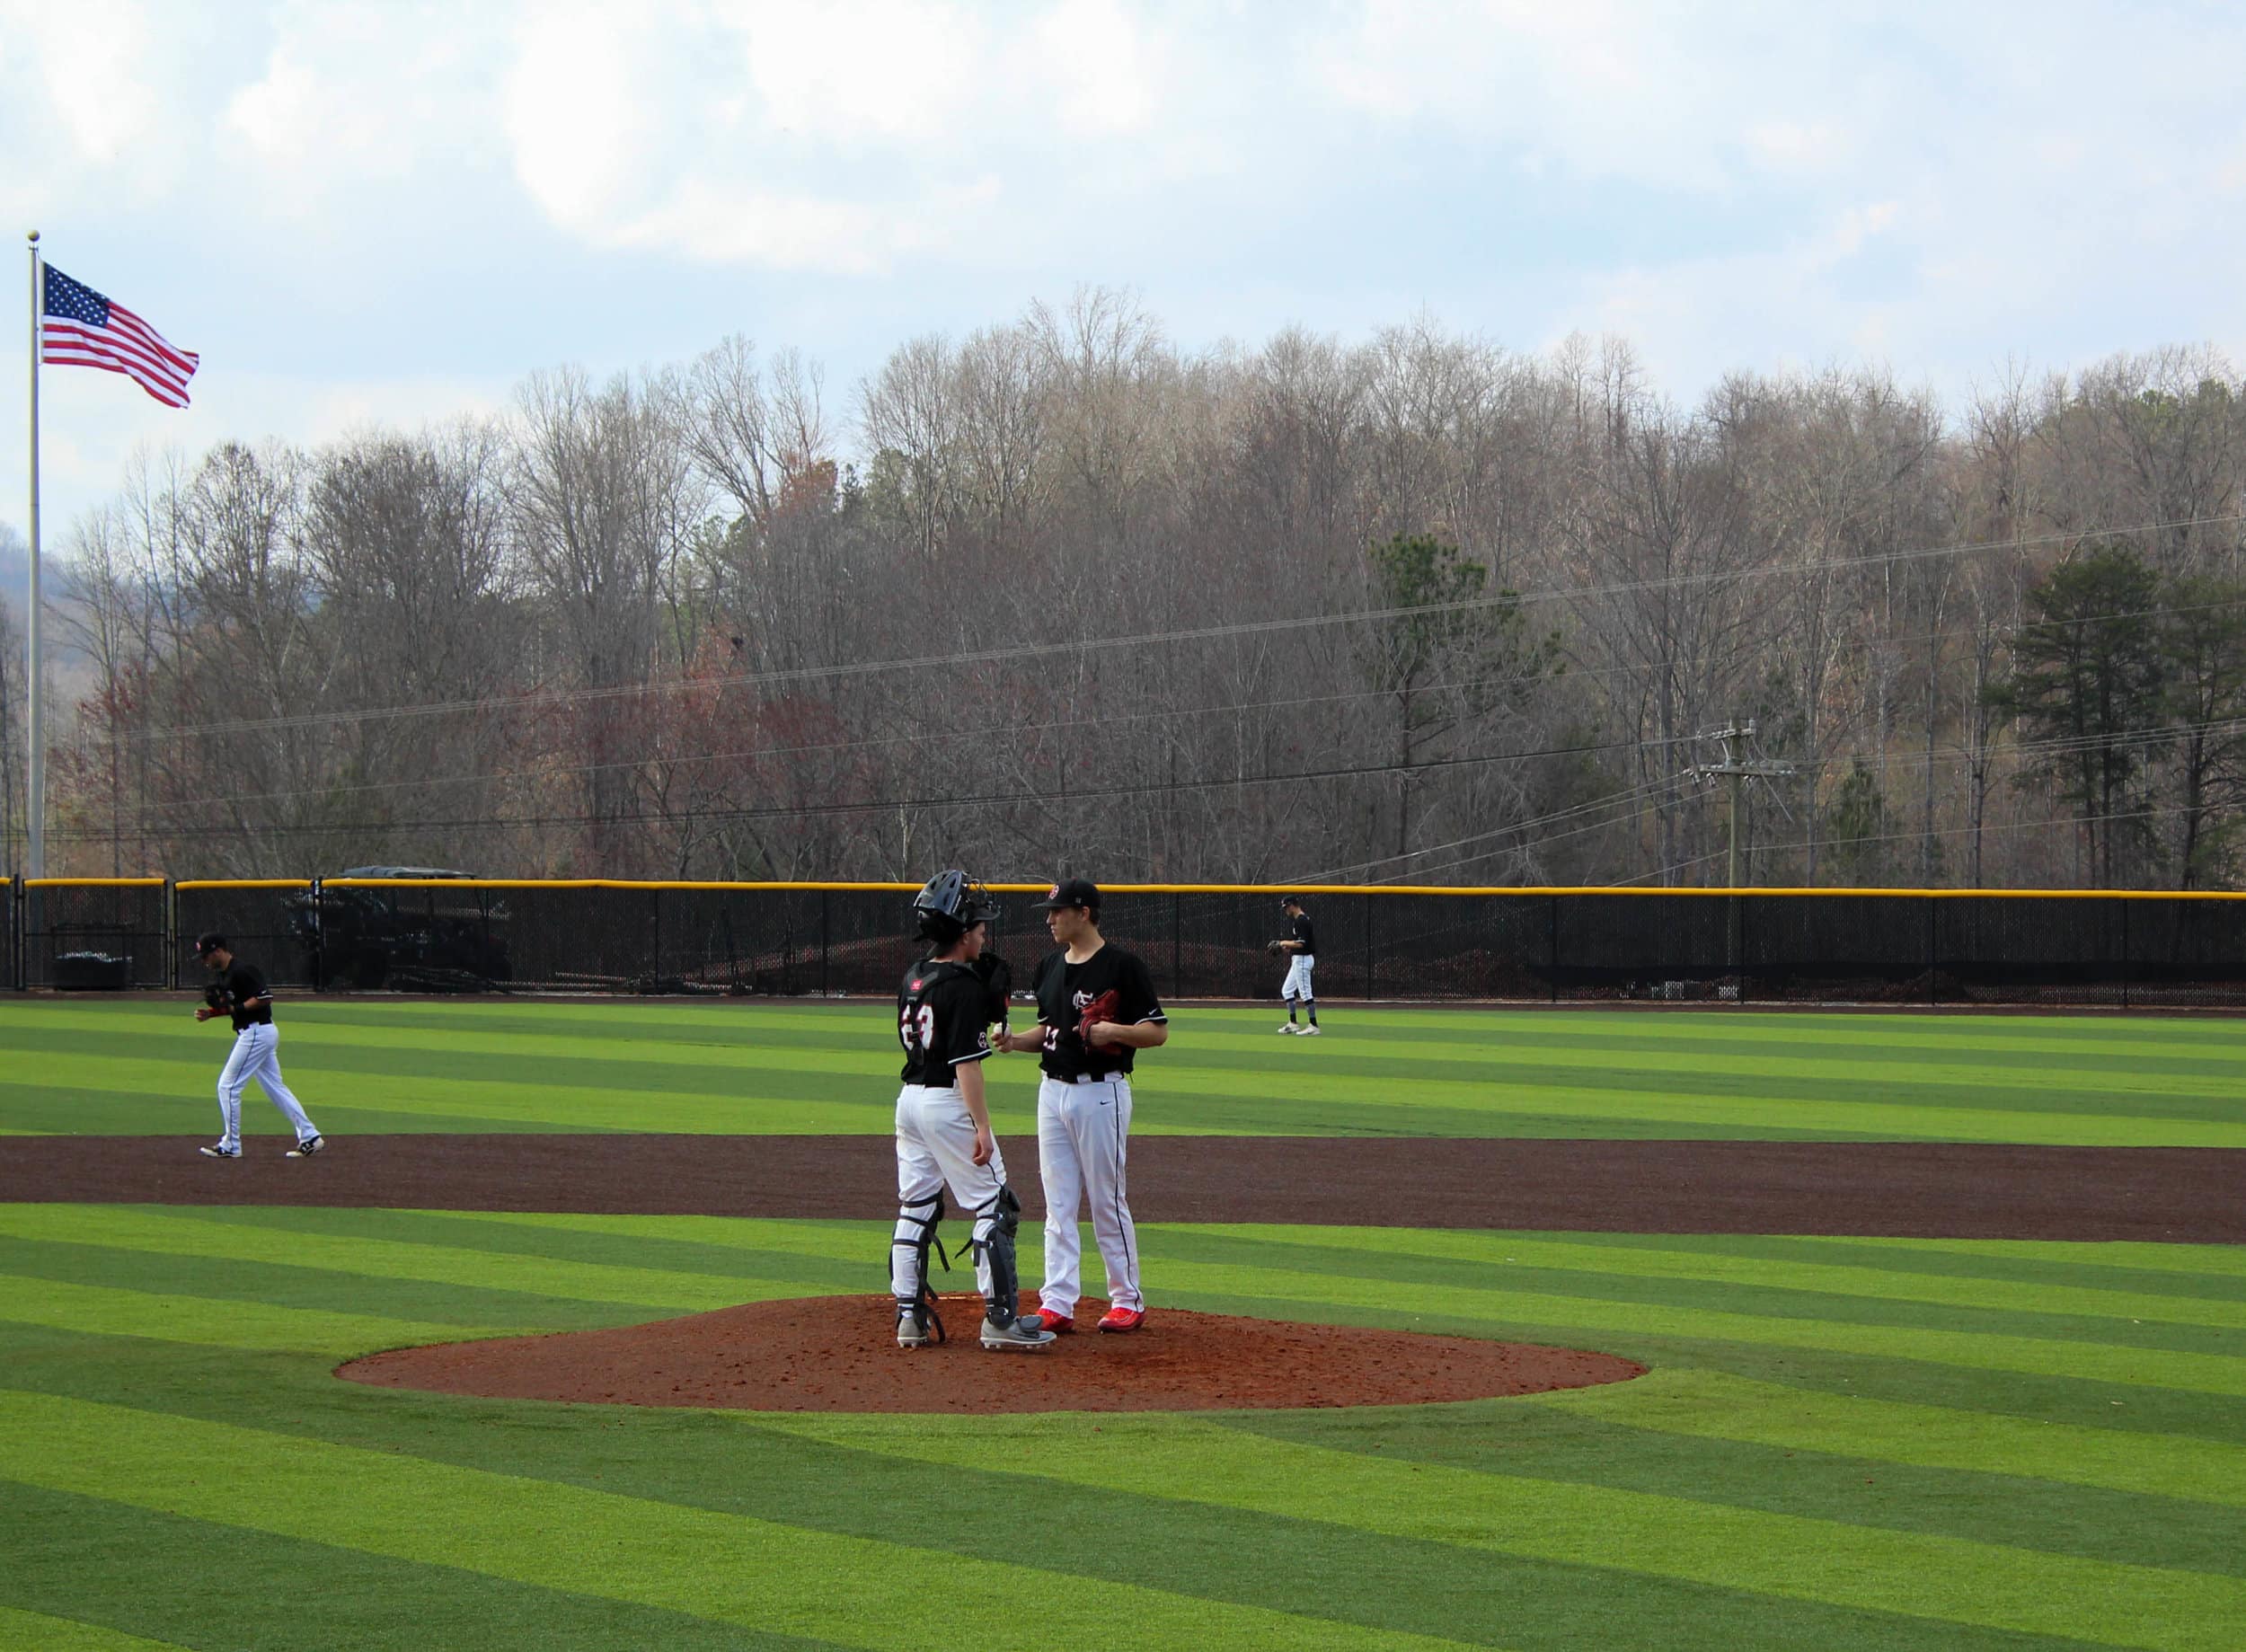 Lex Tuten (23) and Ethan Garner (27) talk on the mound about pitch strategy.